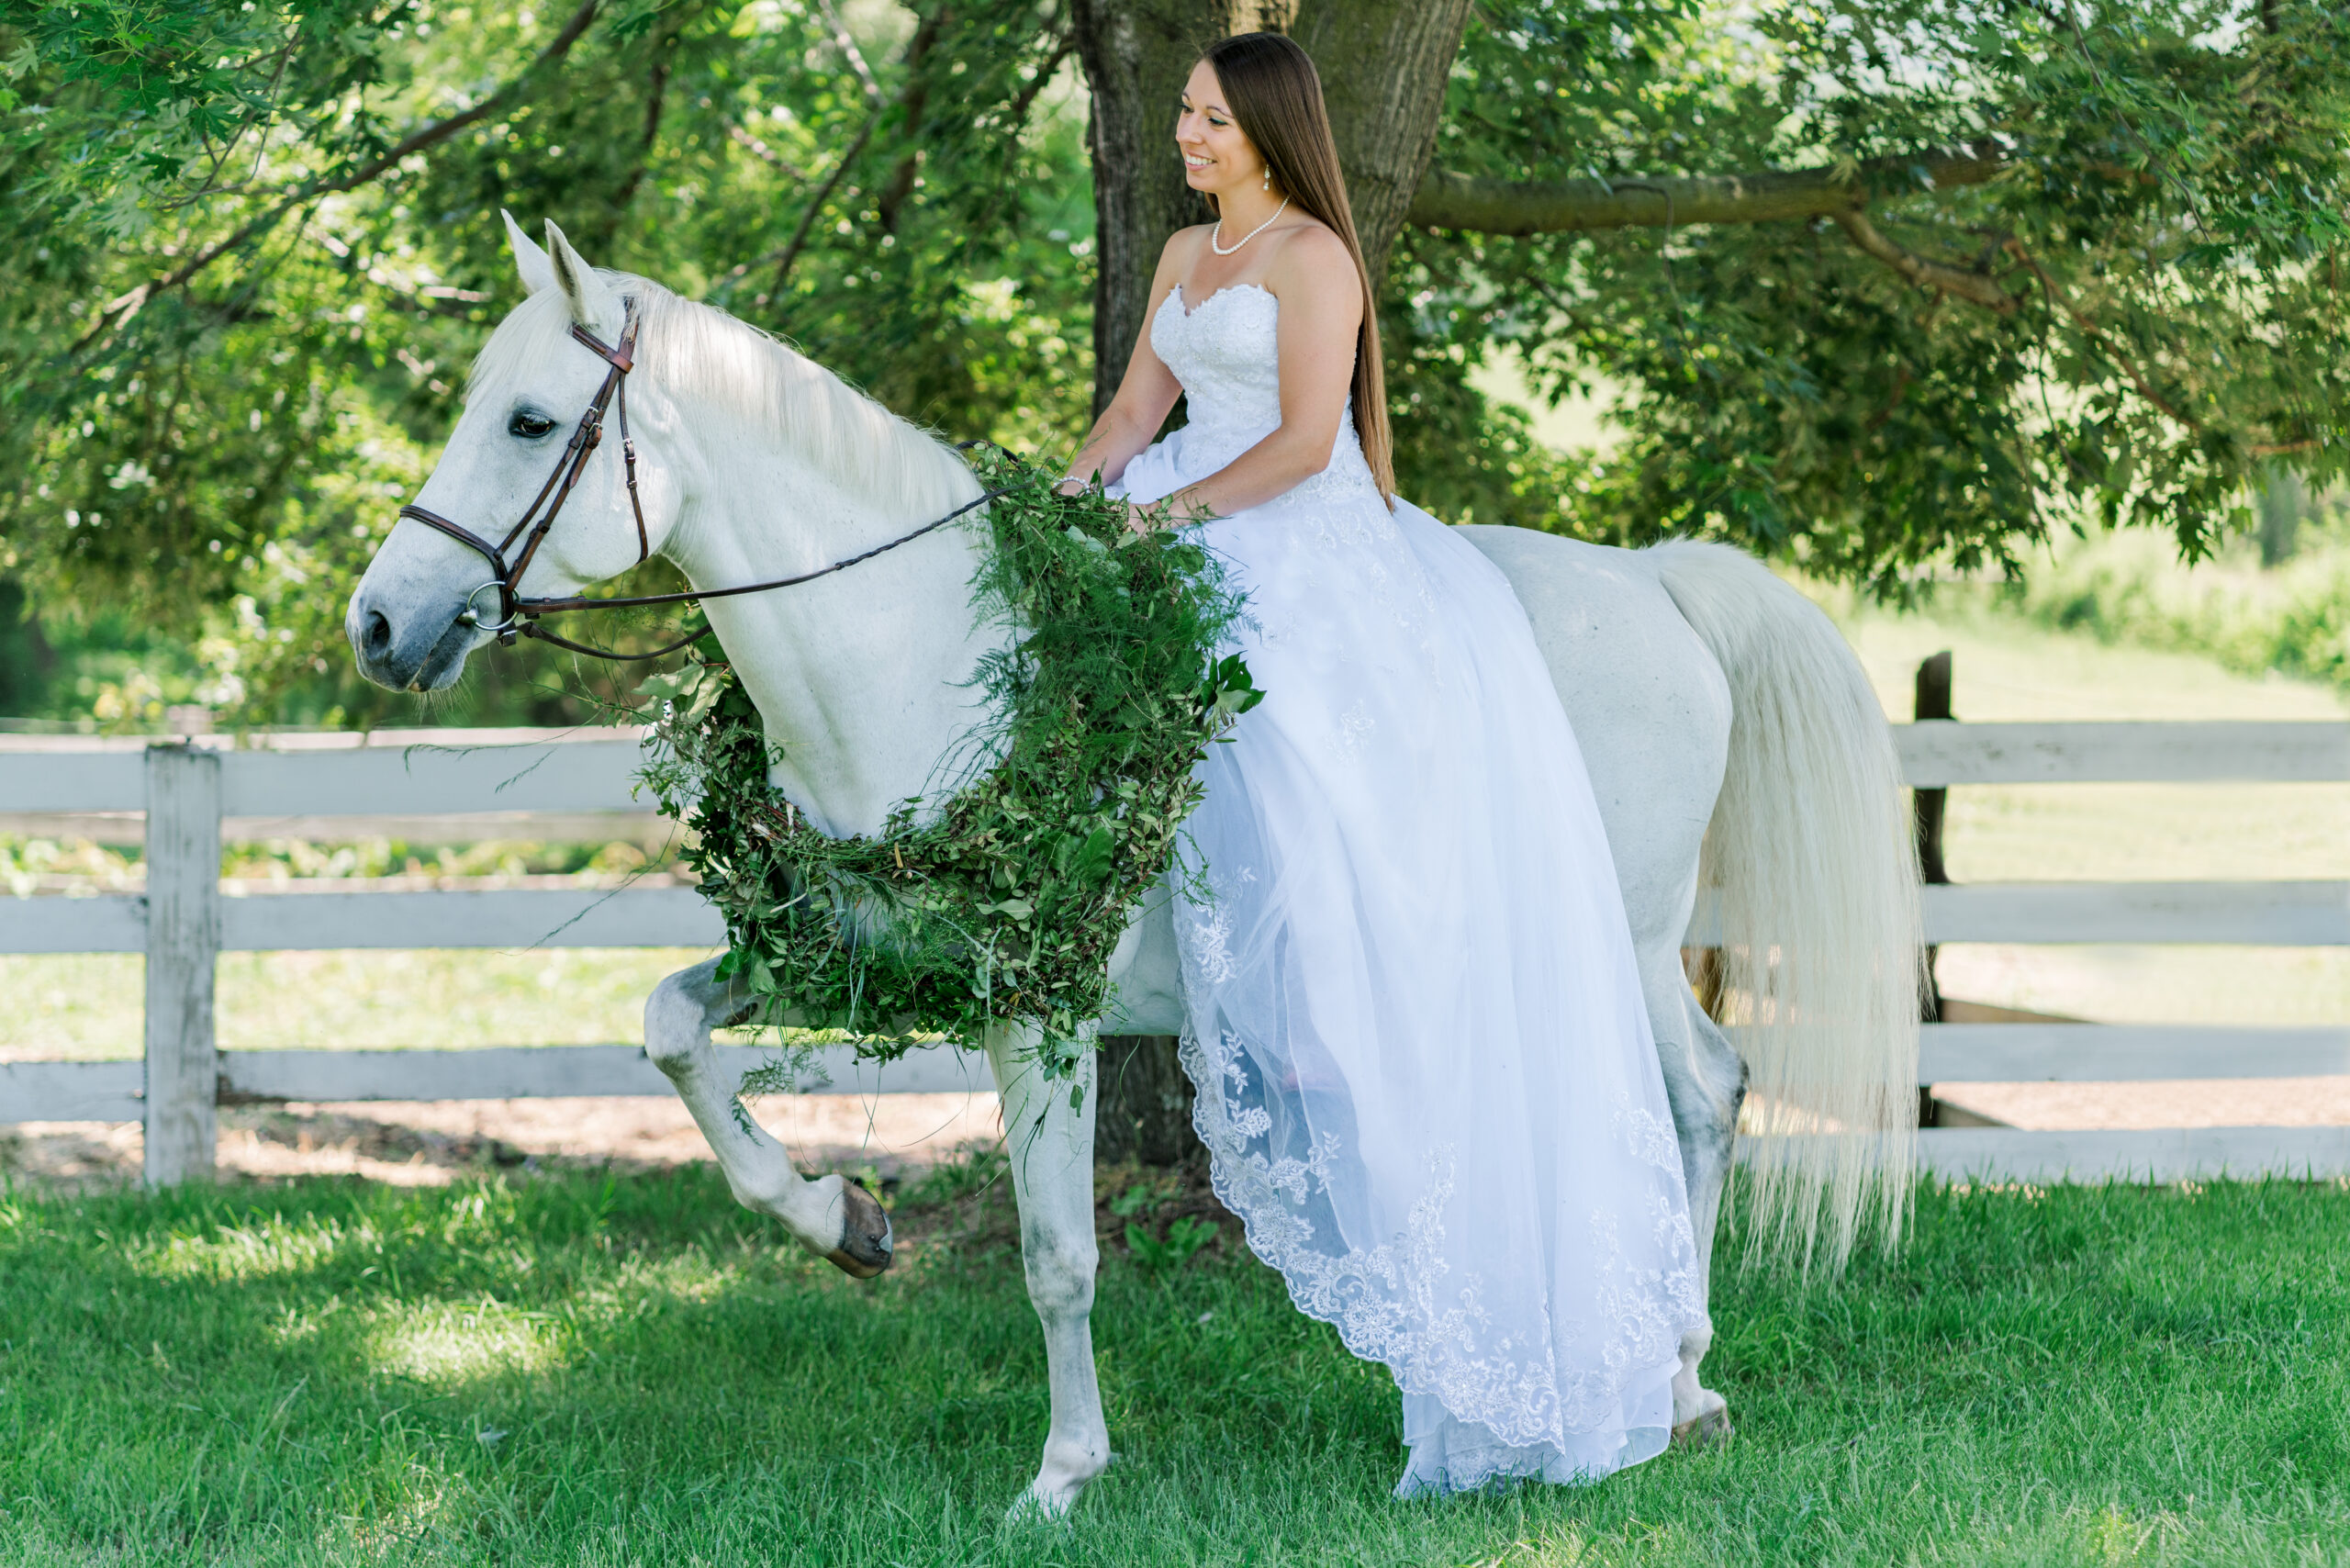 Kelli wears her wedding dress and sits on her white mare Lily in the green grass next to a white fence line